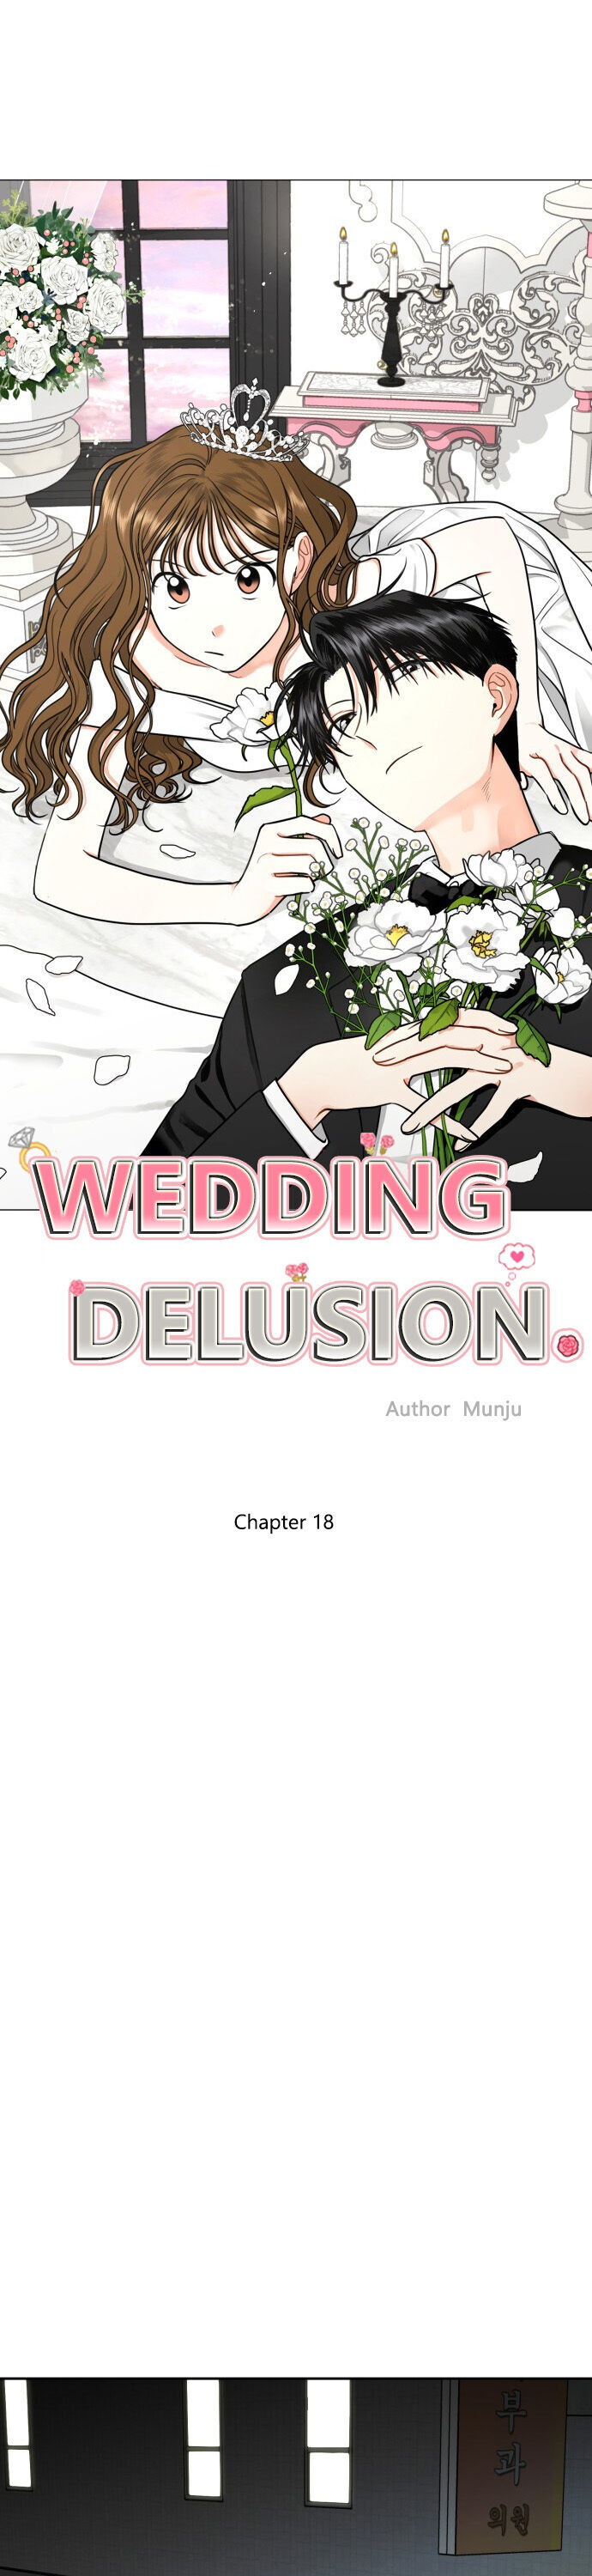 Wedding Delusion Chapter 18 - Page 0